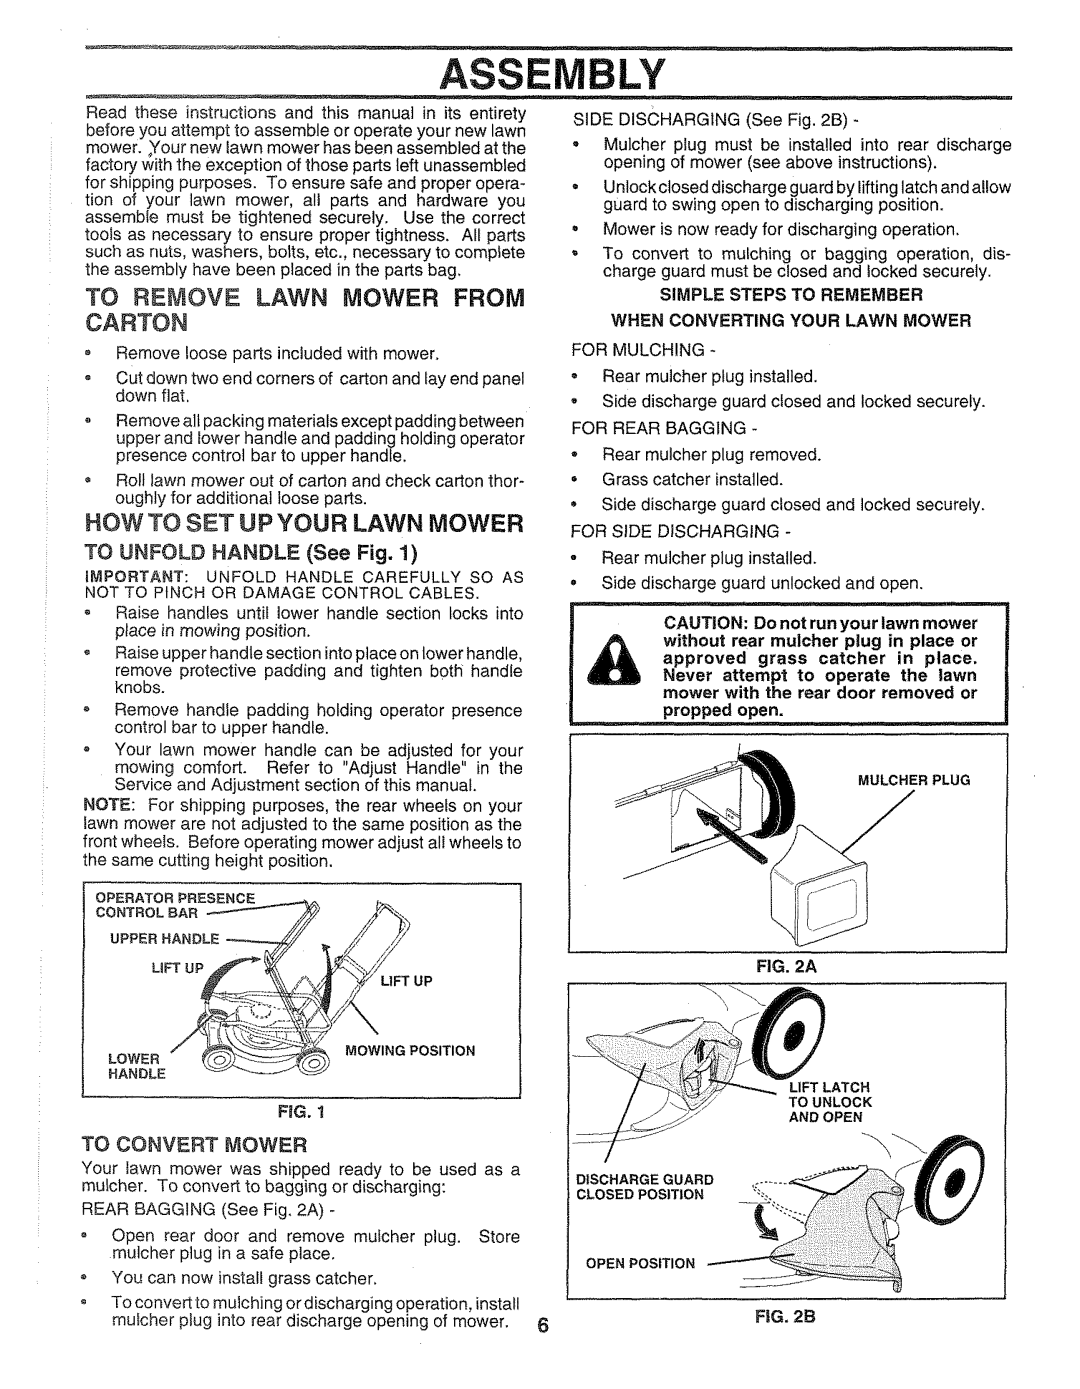 Sears 917.372851 owner manual To Remove Lawn Mower From, Carton, How To Set Upyour Lawn Mower, TO UNFOLD HANDLE See Fig 